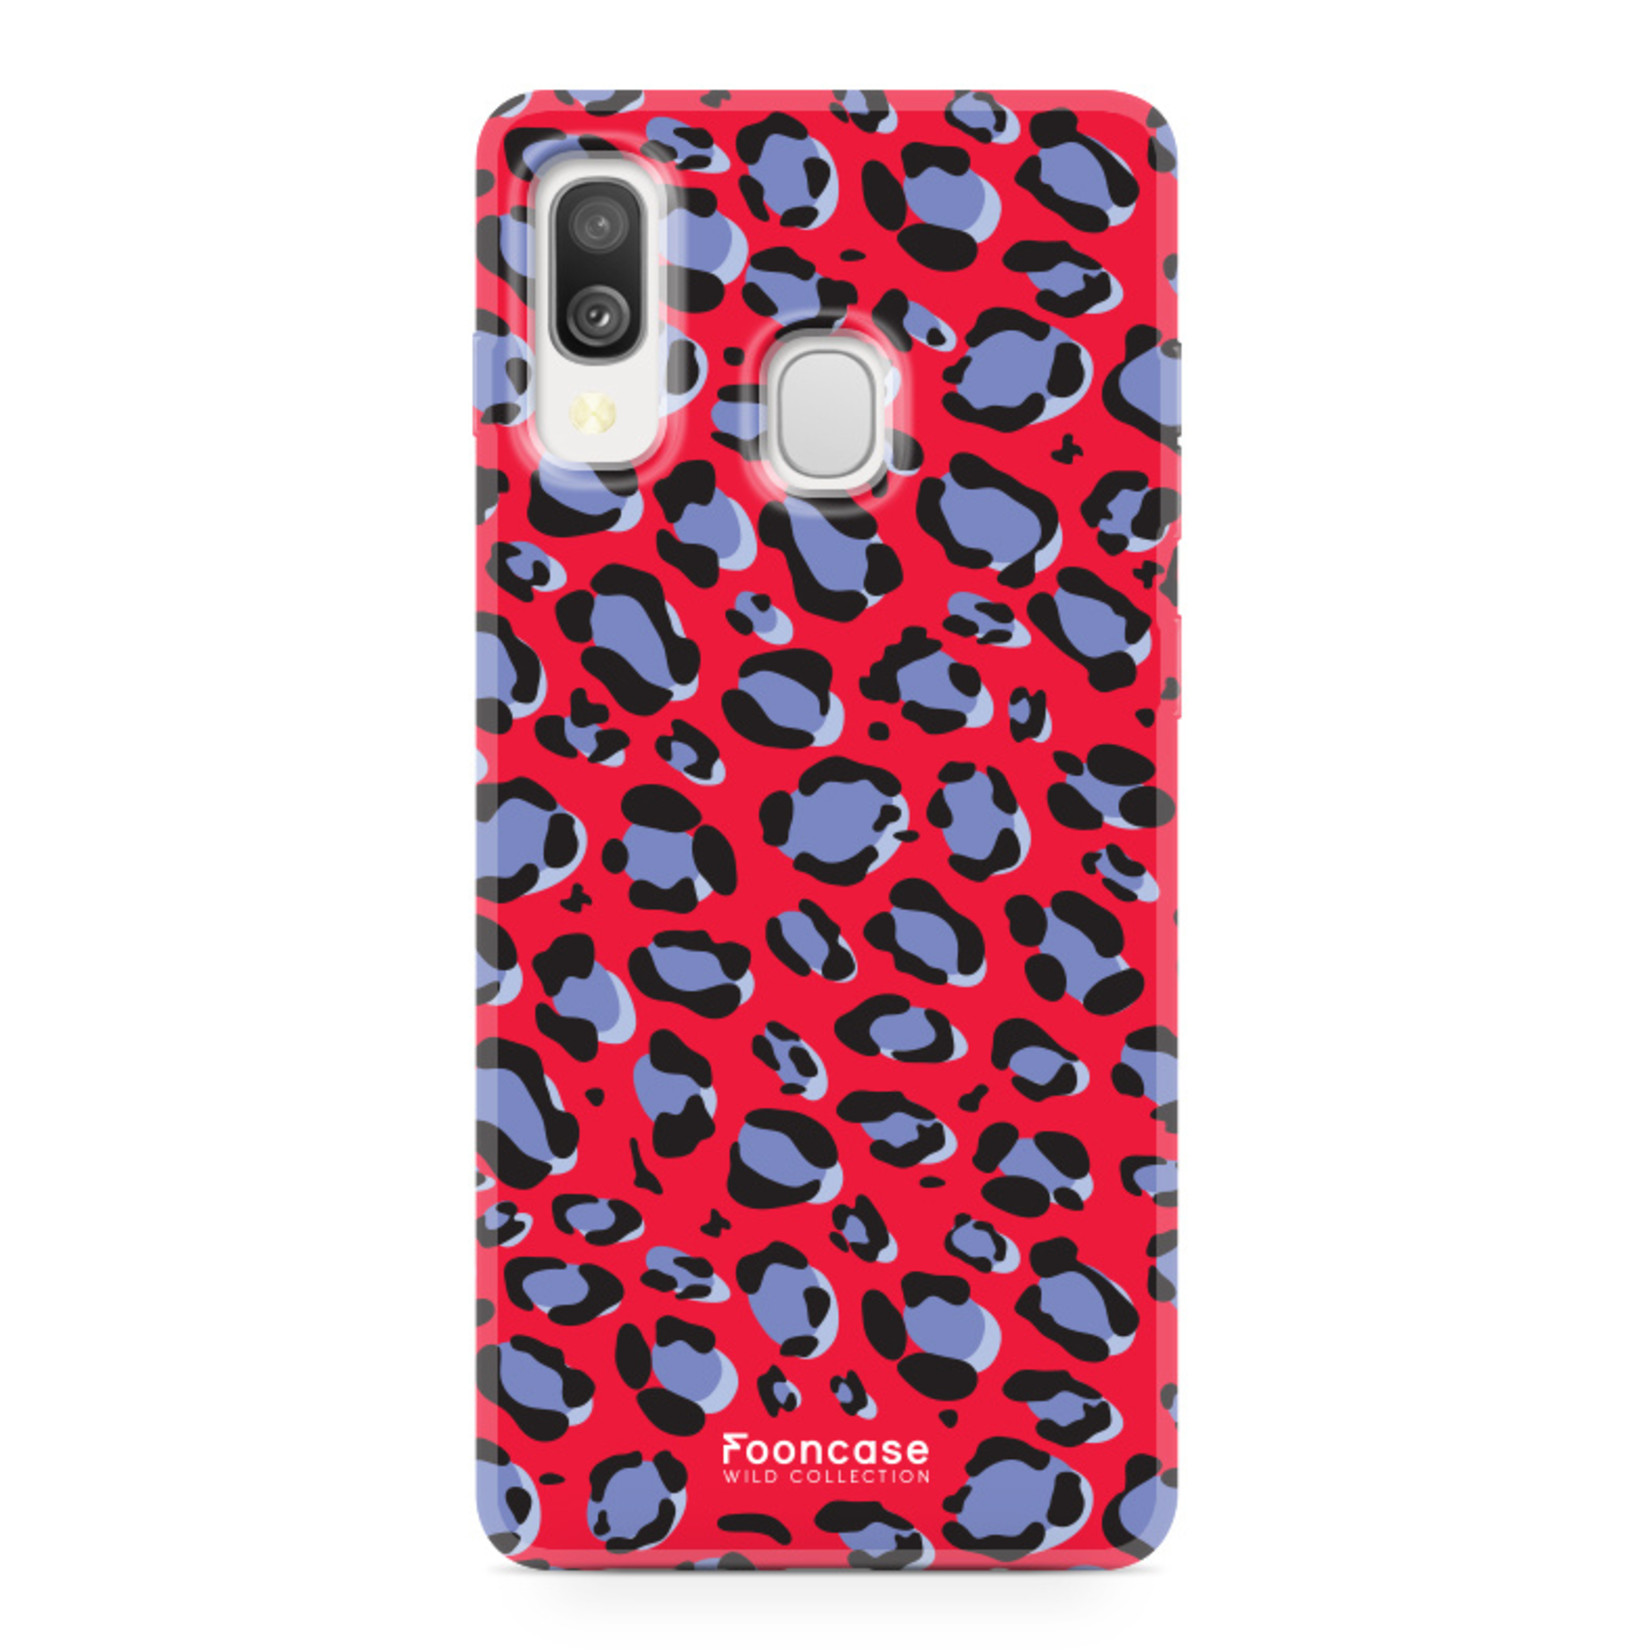 Samsung Galaxy A40 hoesje TPU Soft Case - Back Cover - Luipaard / Leopard print / Rood